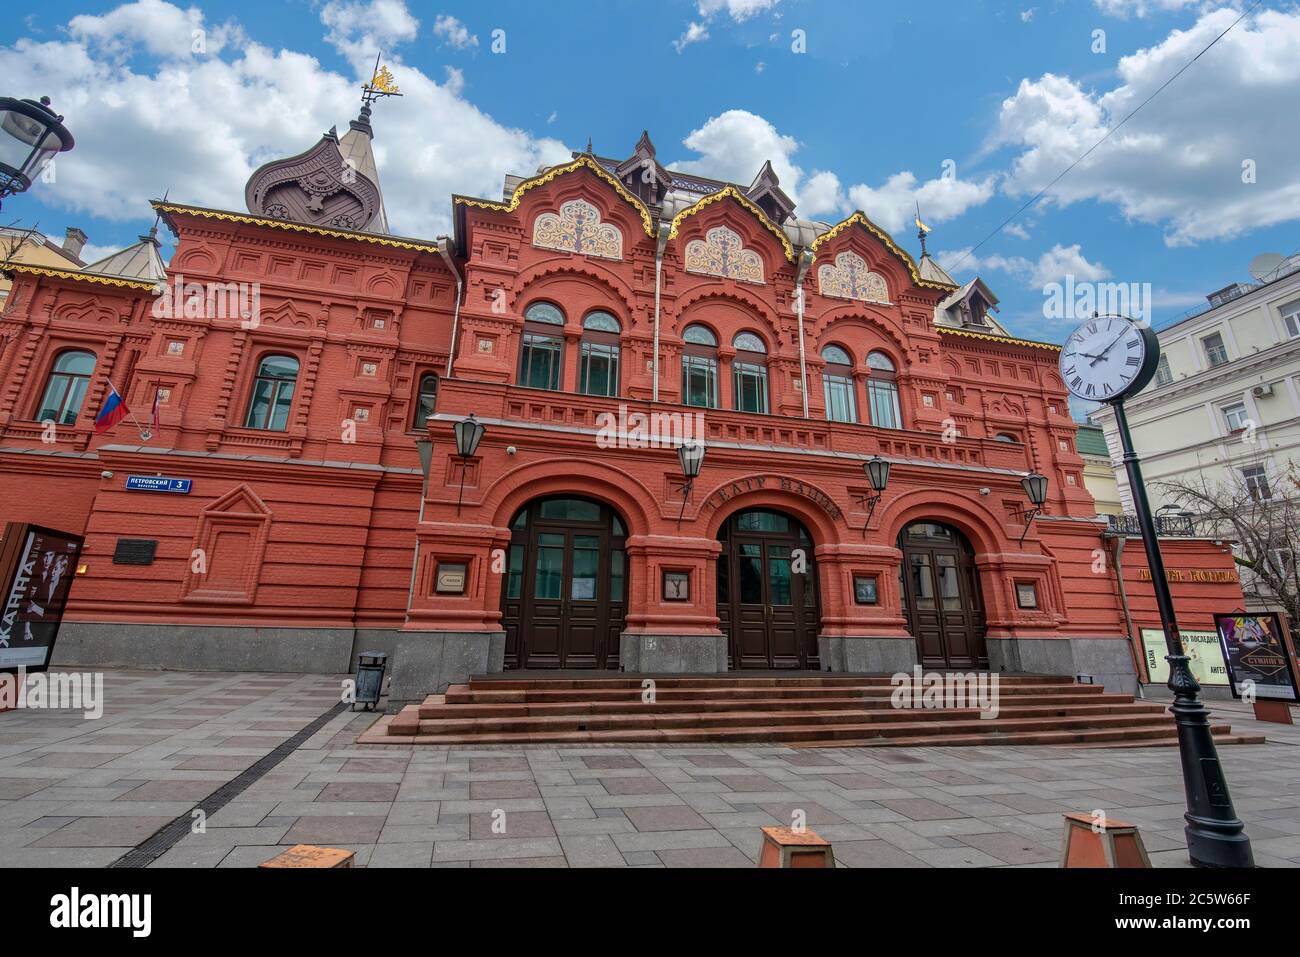 The State Theater of Nations located in the Petrovsky Lane in Moscow, Russia Stock Photo